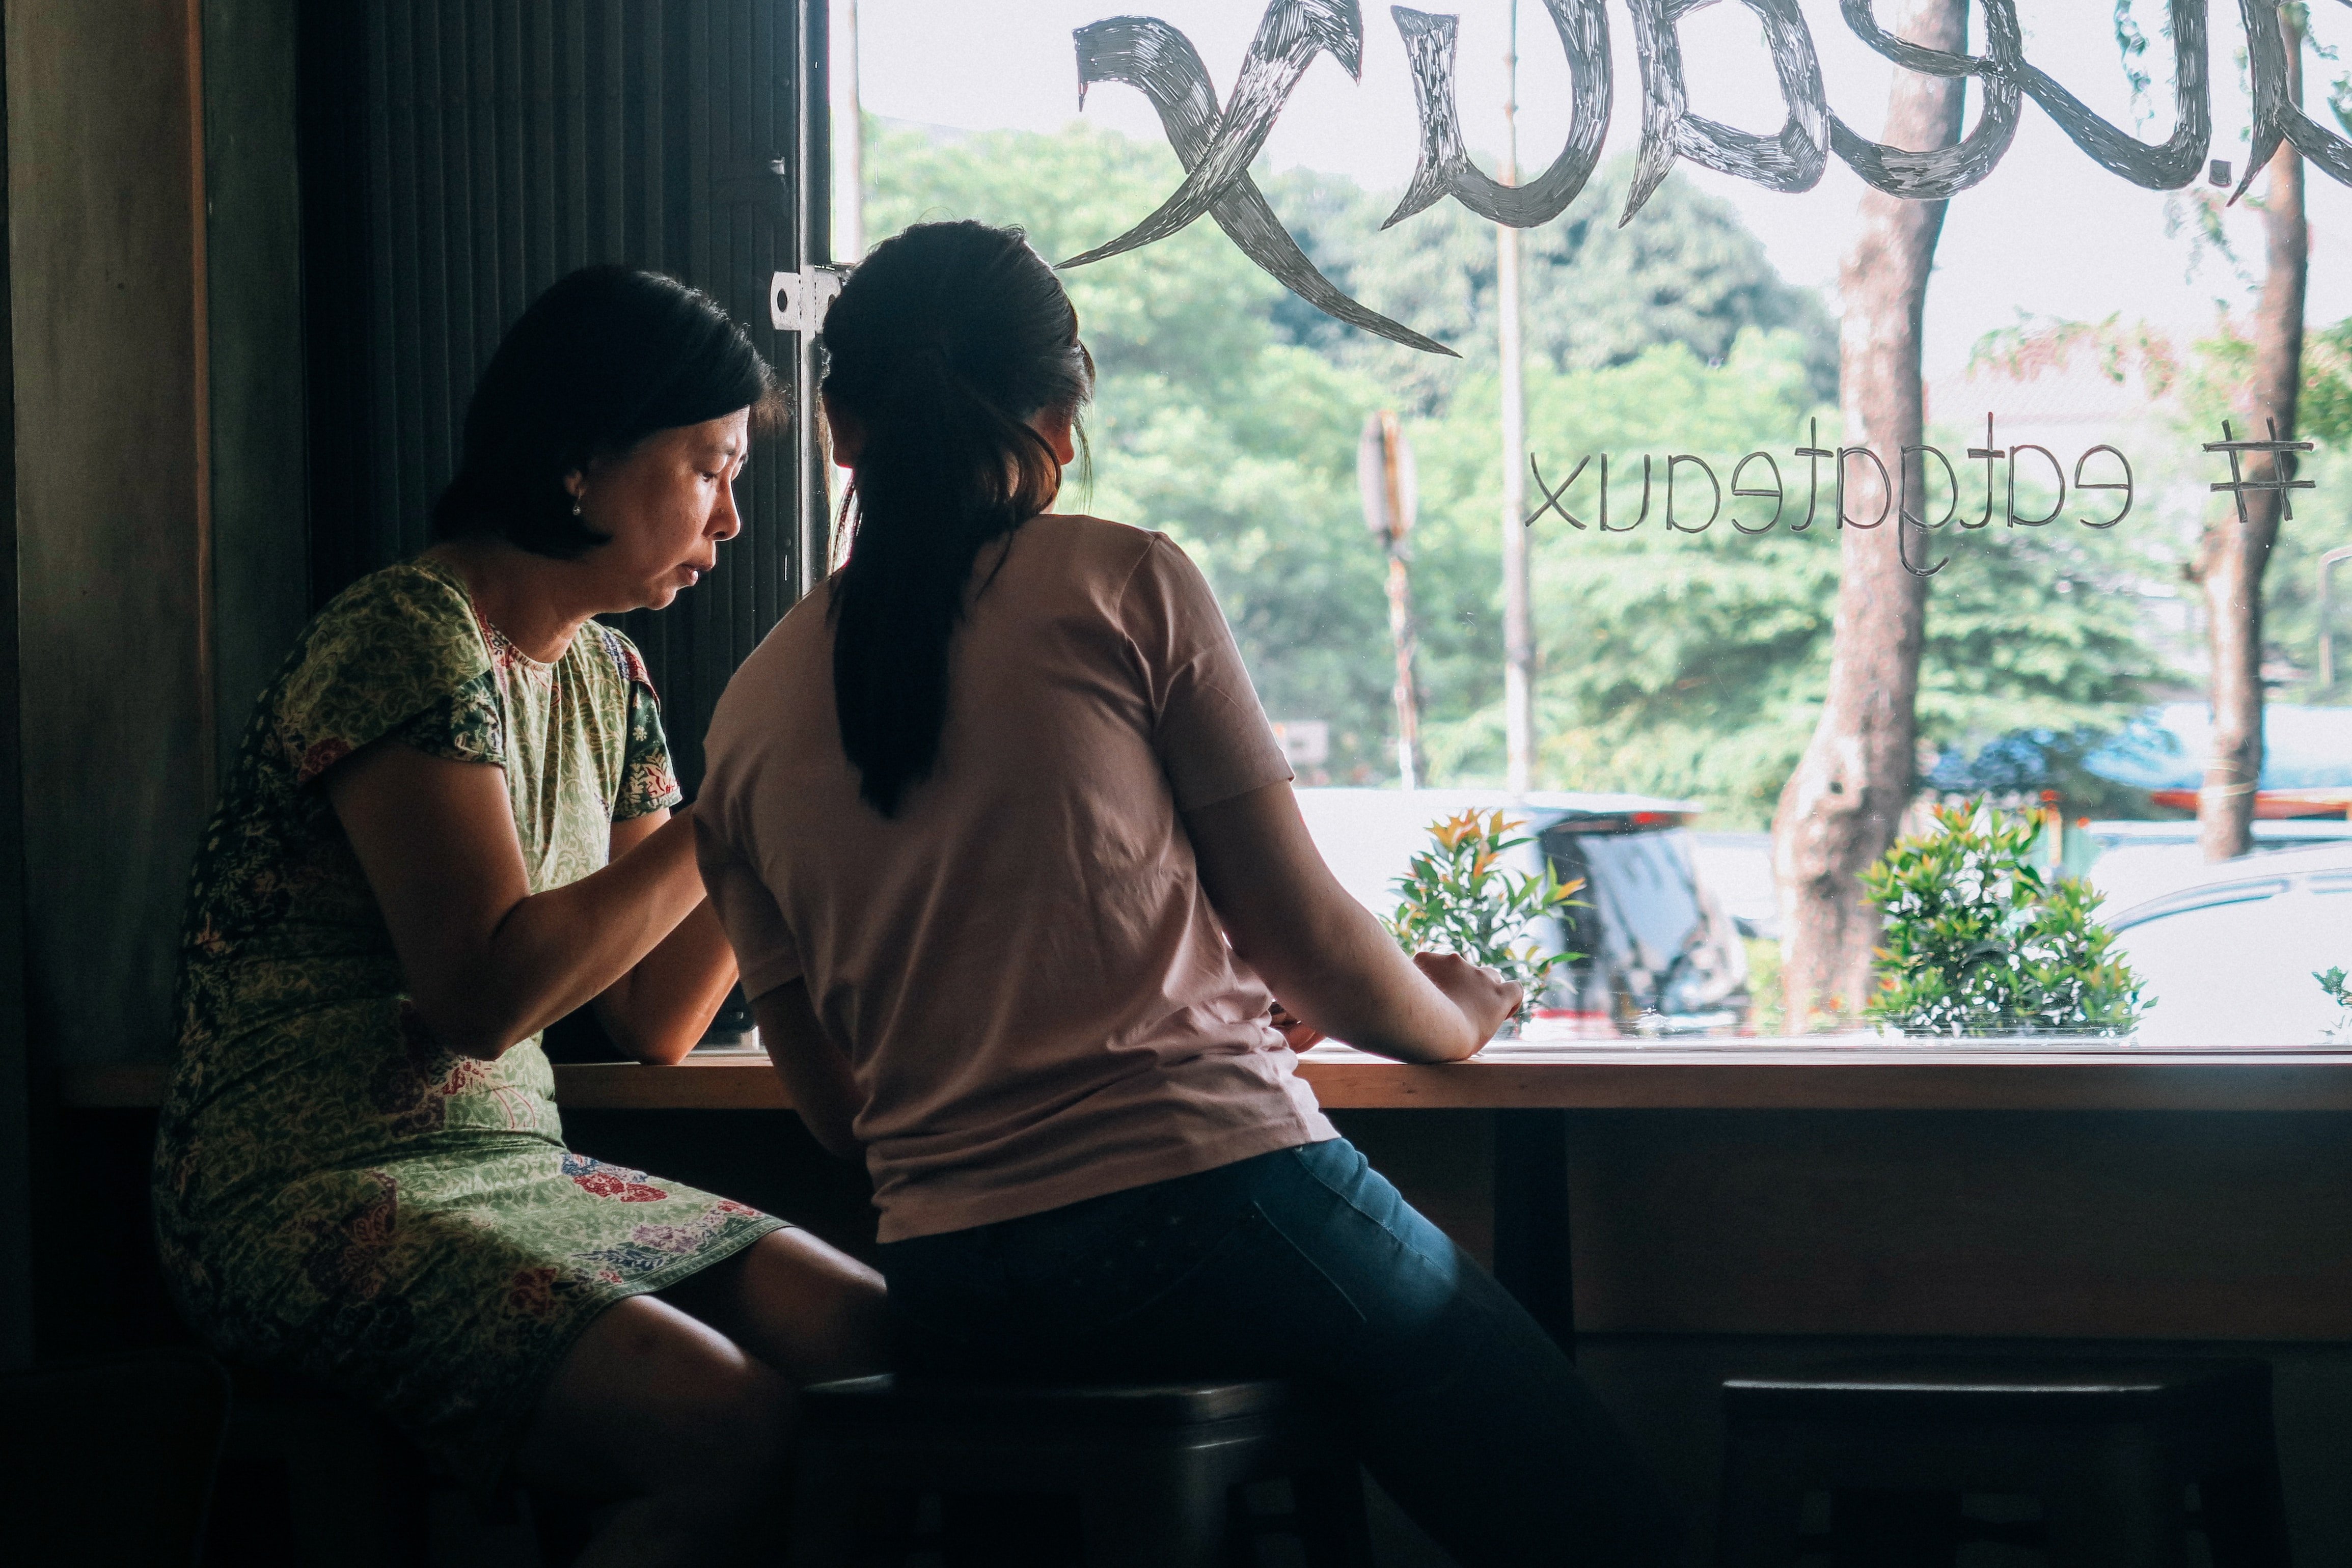 An elderly mother and her daughter talking to each other| Photo by Farrel Nobel on Unsplash